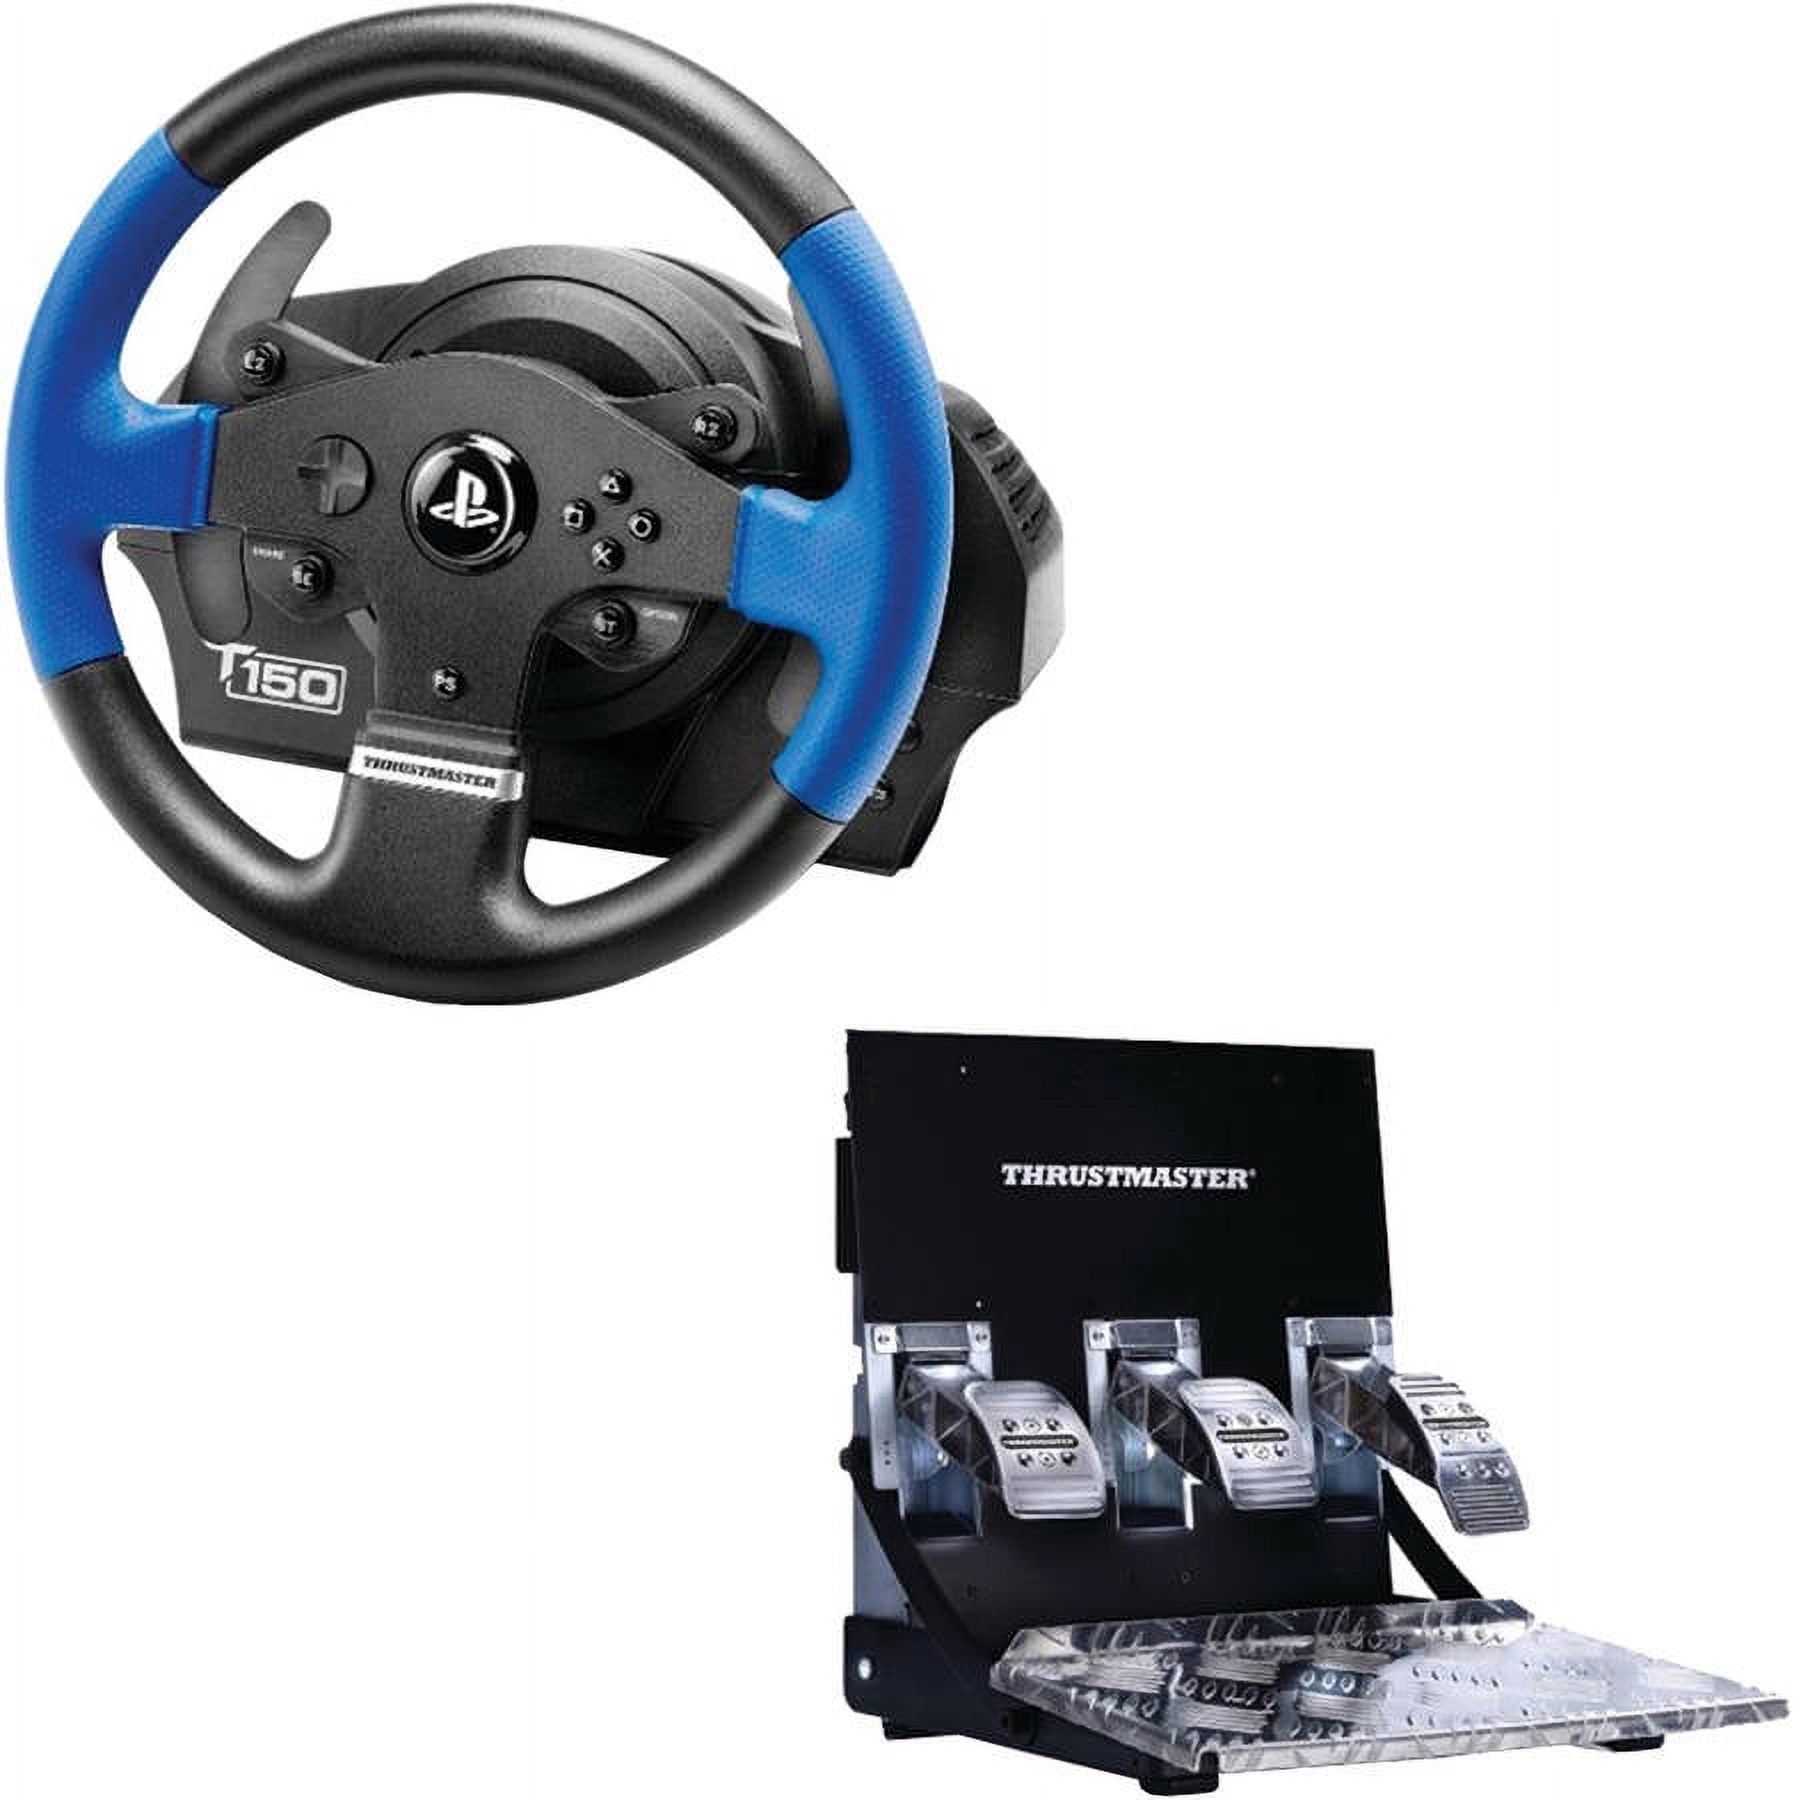 Thrustmaster 4169084 T150 Pro Racing Wheel with T3PA Pedal Set - image 1 of 7